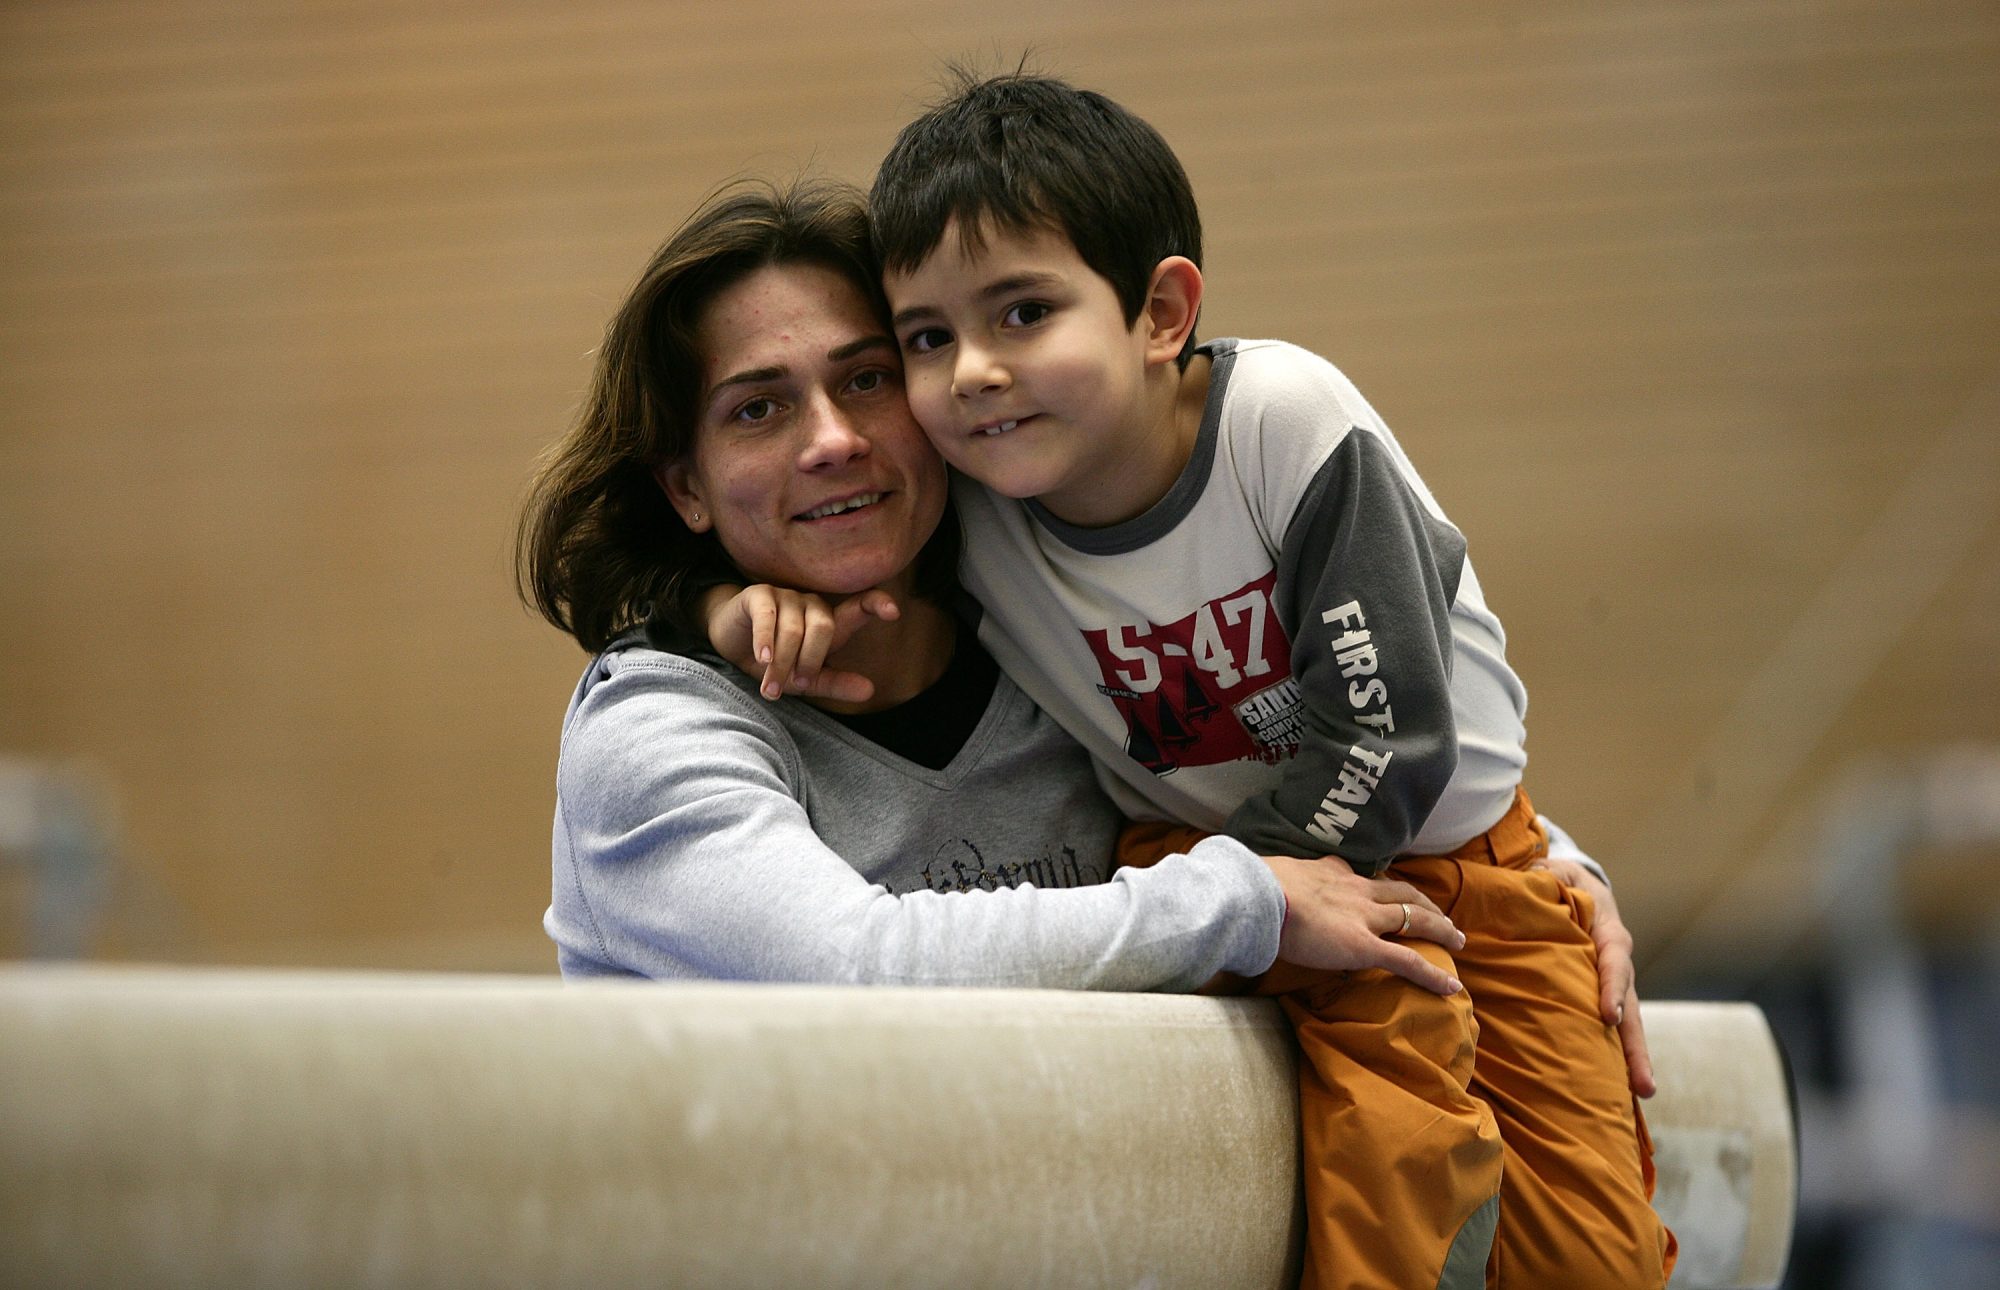 COLOGNE, GERMANY - DECEMBER 04:  German gymnast Oksana Chusovitina pose for a photo with her son Alisher prior to the training on December 04, 2006 in Cologne, Germany.  (Photo by Vladimir Rys/Bongarts/Getty Images)